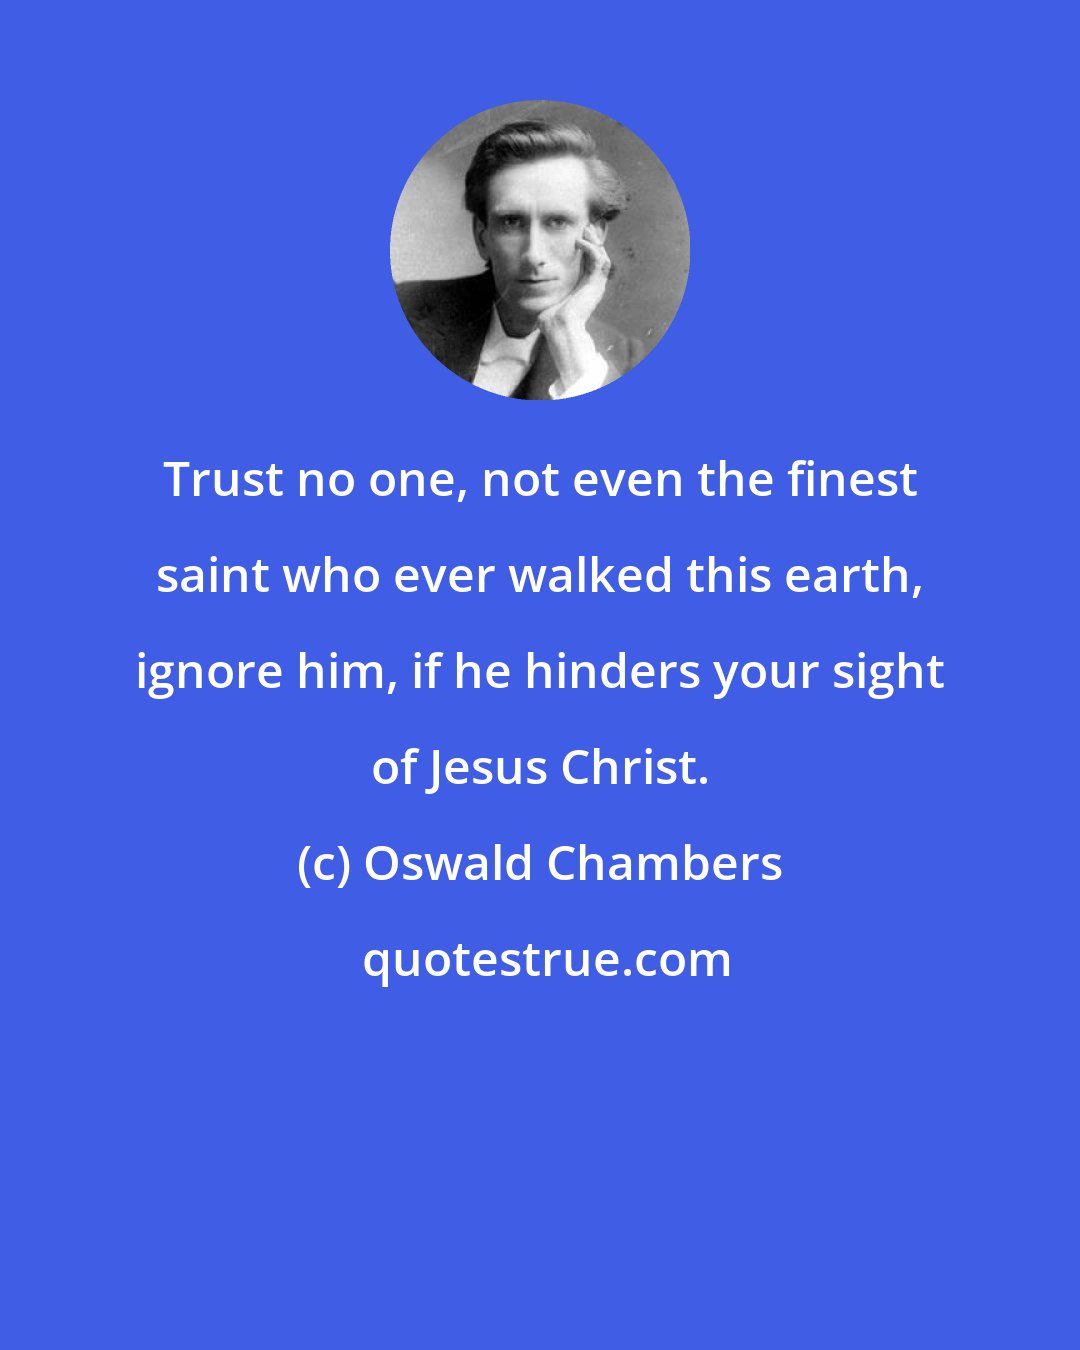 Oswald Chambers: Trust no one, not even the finest saint who ever walked this earth, ignore him, if he hinders your sight of Jesus Christ.